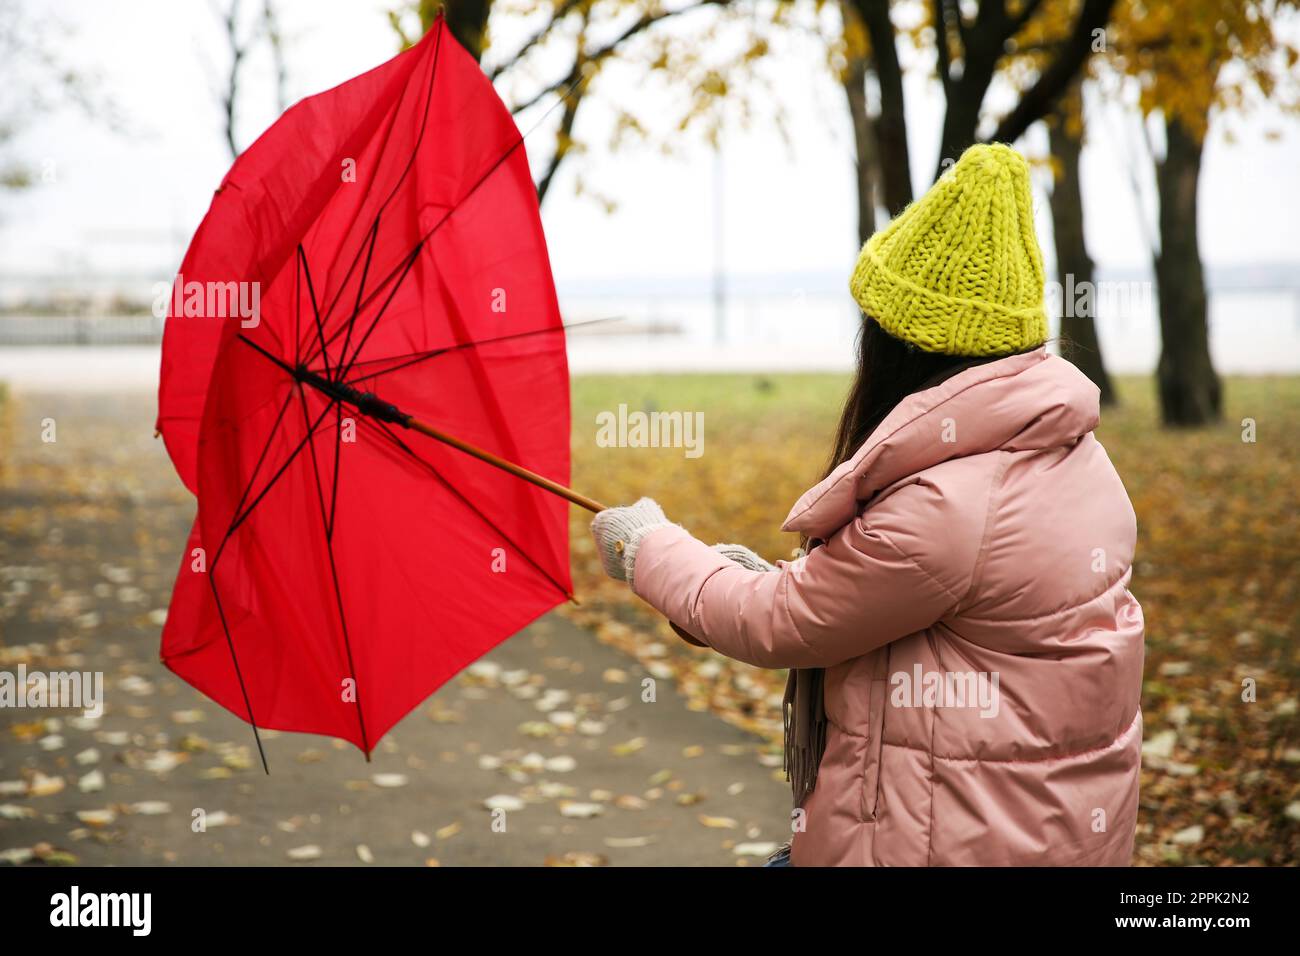 Woman with red umbrella caught in gust of wind outdoors Stock Photo